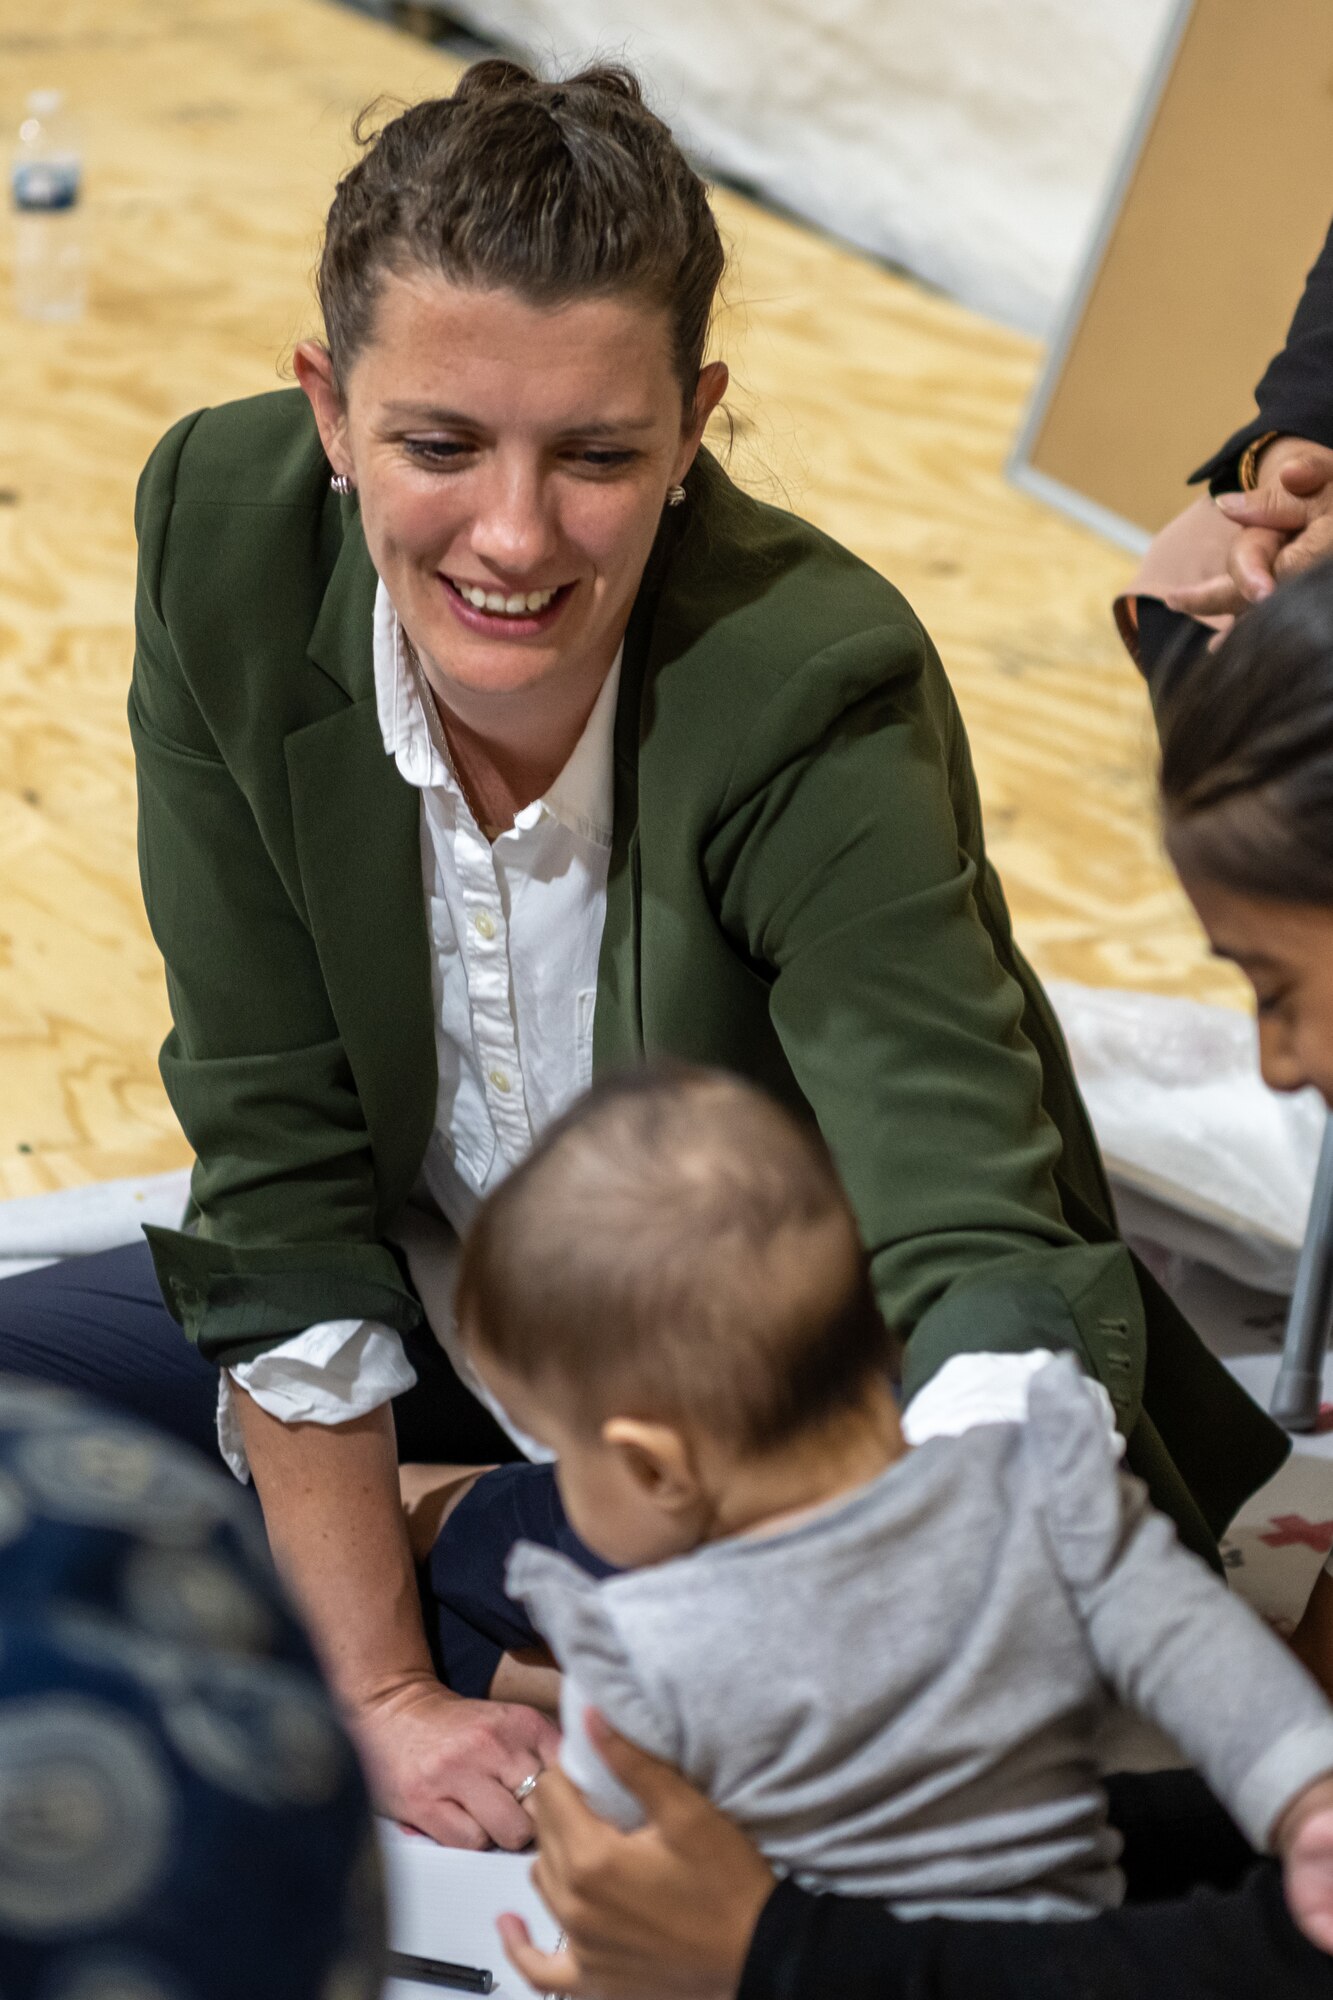 Erin Cooper, a woman, peace and policy analyst with the Secretary of Defense and deployed to Task Force-Holloman as a gender advisor, plays with a child during a women’s meeting at Aman Omid Village on Holloman Air Force Base, New Mexico, Oct. 7, 2021. The Department of Defense, through U.S. Northern Command, and in support of the Department of Homeland Security is providing transportation, temporary housing, medical screening, and general support for at least 50,000 Afghans at suitable facilities, in permanent or temporary structures, as quickly as possible. This initiative provides Afghan personnel essential support at secure locations outside Afghanistan. (U.S. Air Force photo by Senior Airman Skyler Combs)